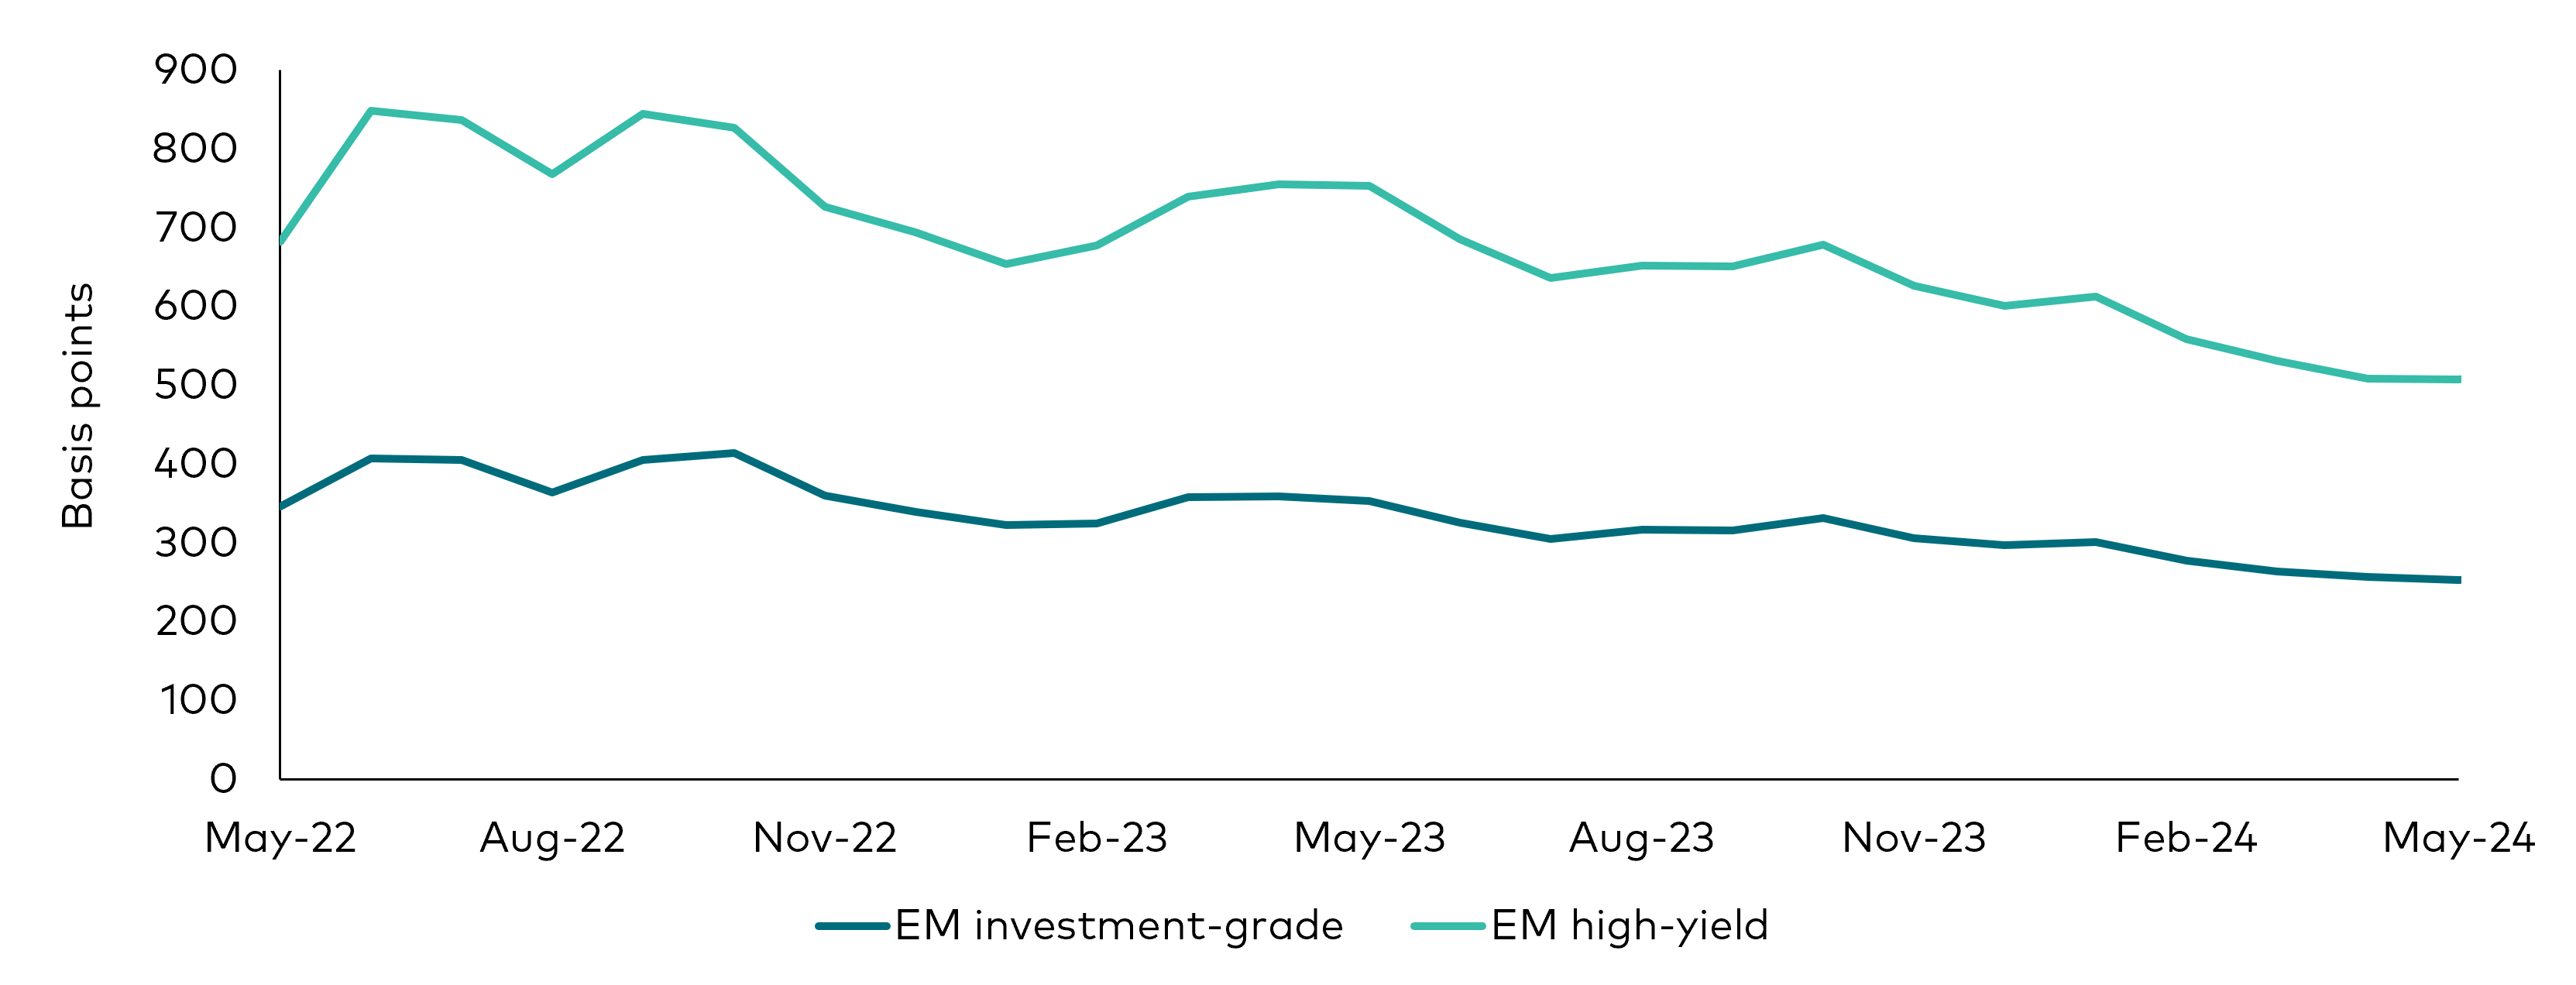 A line chart tracking the historical performance of emerging market investment-grade bond spreads and emerging market high-yield bond spreads over the last 24 months through 31 May 2024.  EM IG and EM HY spreasds have been compressing since the start of the year. 